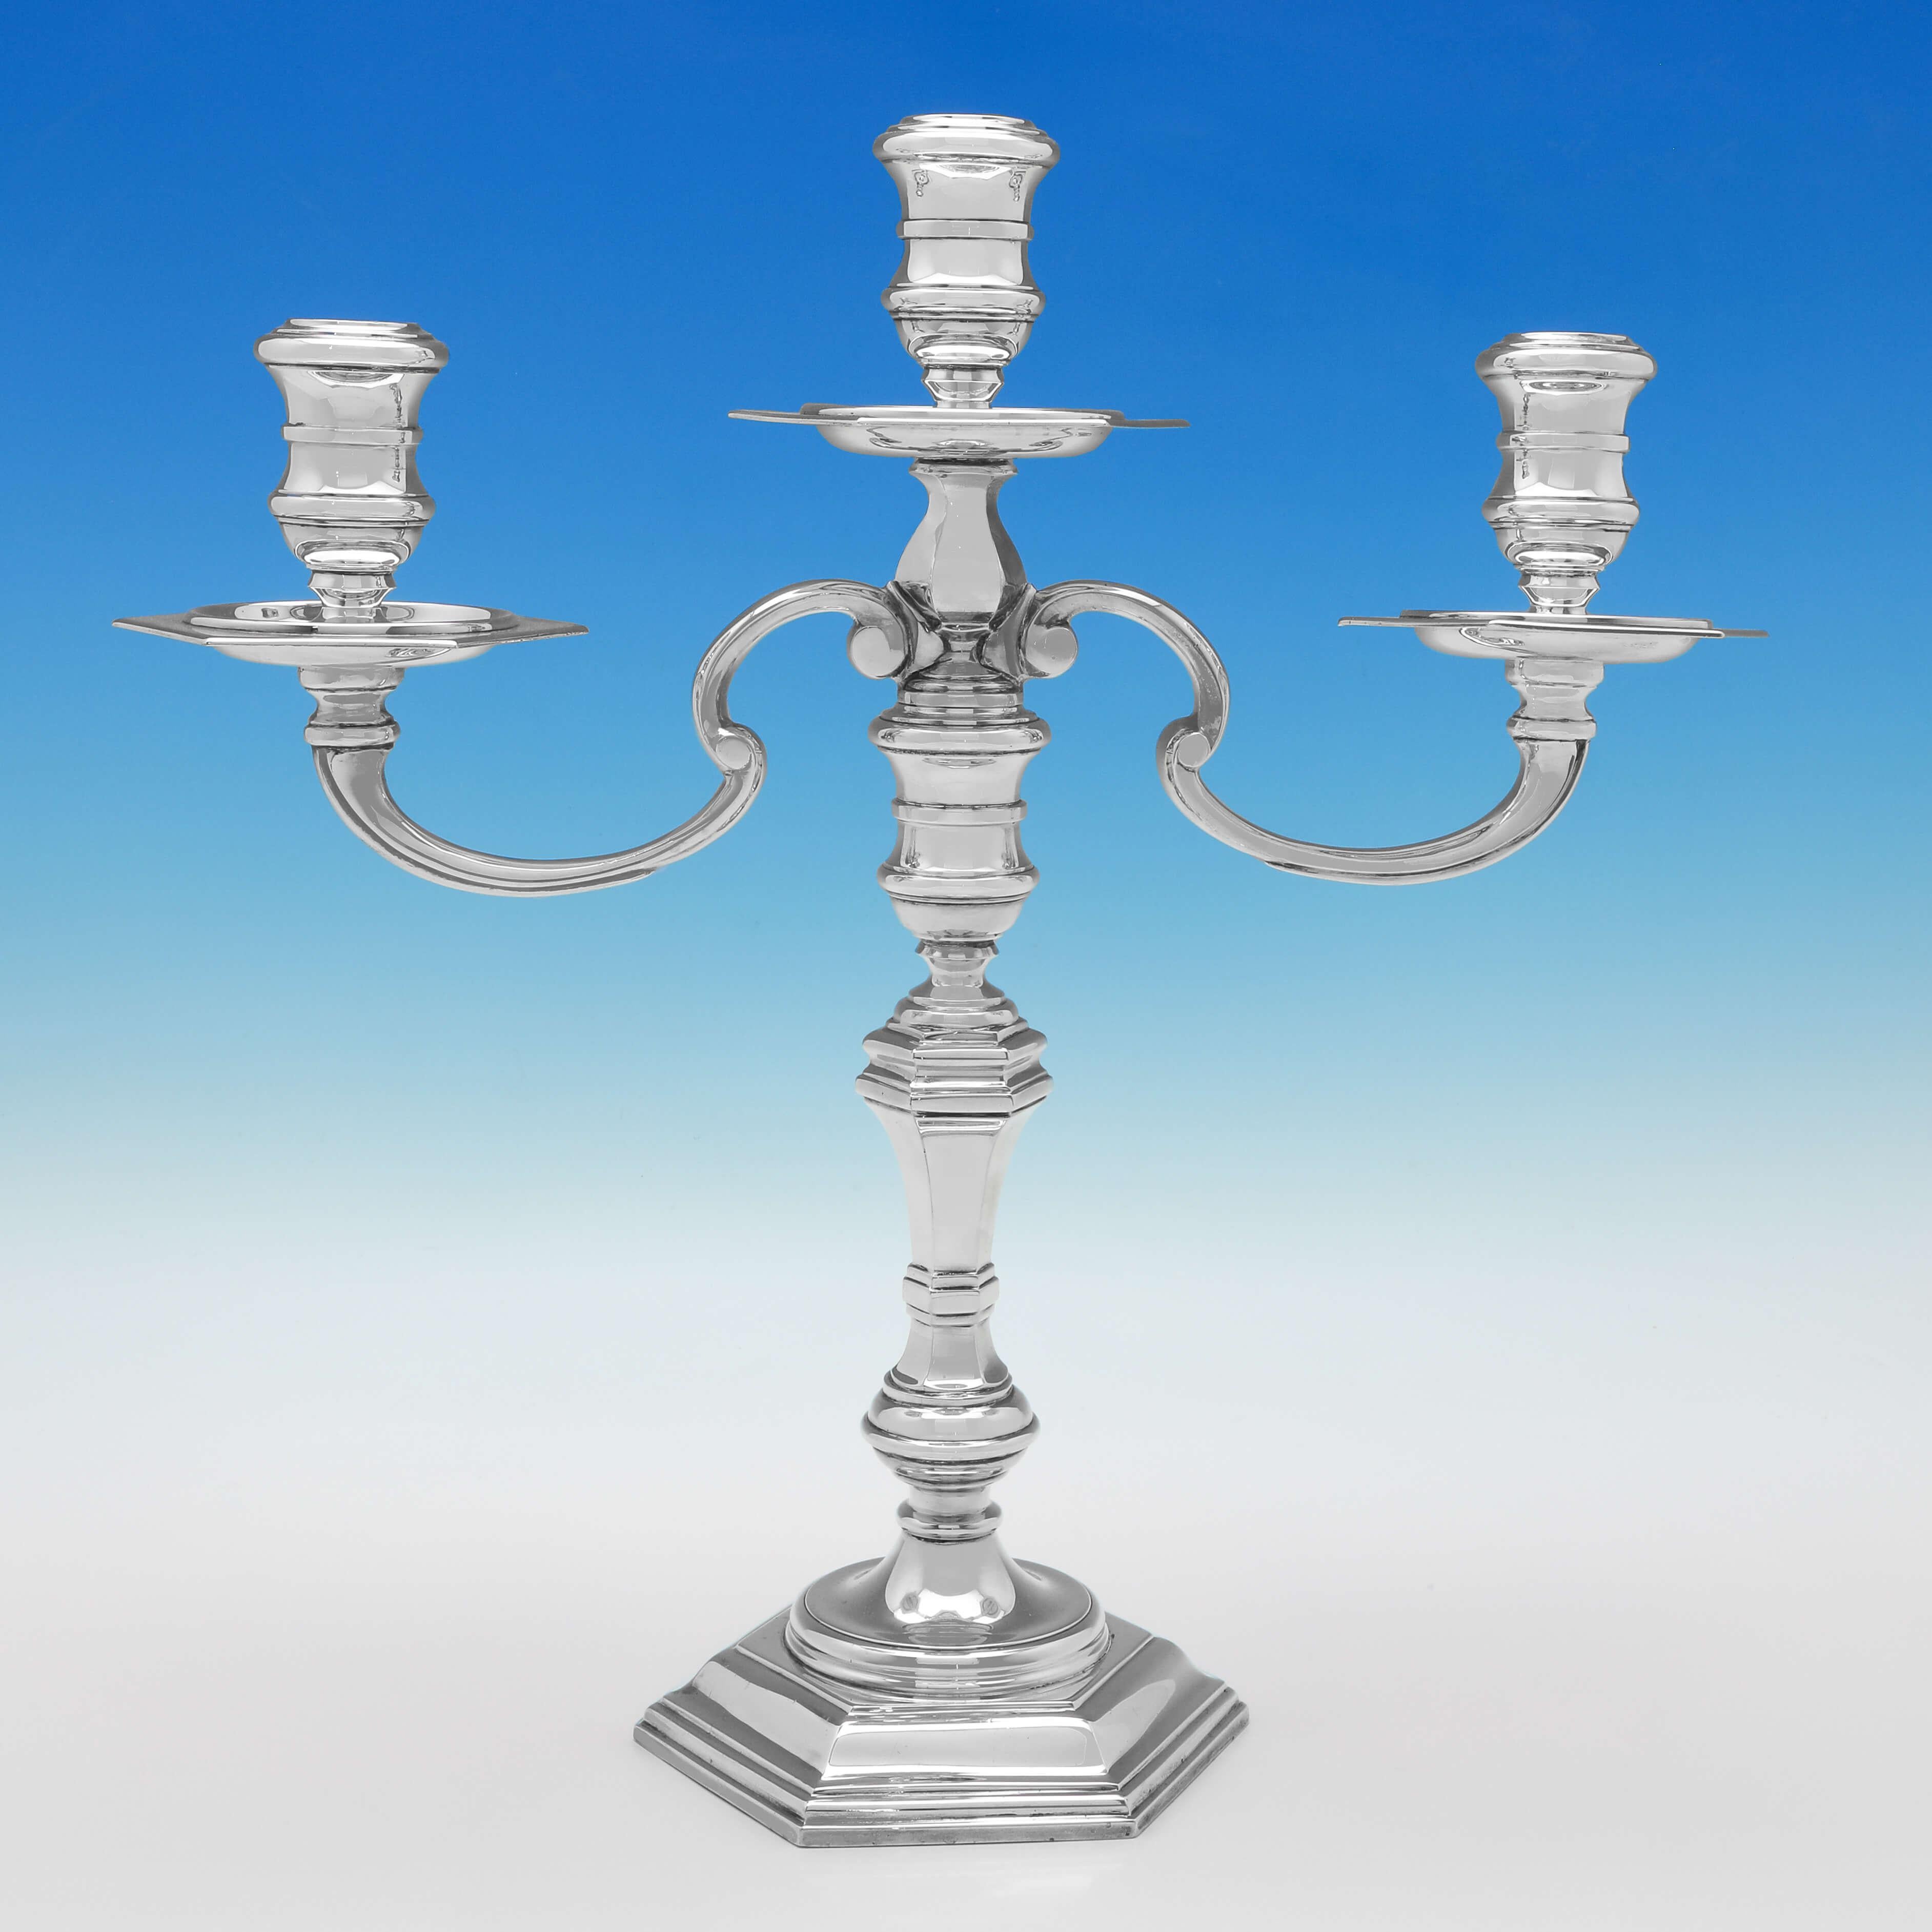 Hallmarked in London in 1962 by Richard Woodman Burbridge, this handsome pair of Sterling Silver Candelabra, are cast and hexagonal in shape, with removable branches. Each candelabrum measures 15.25